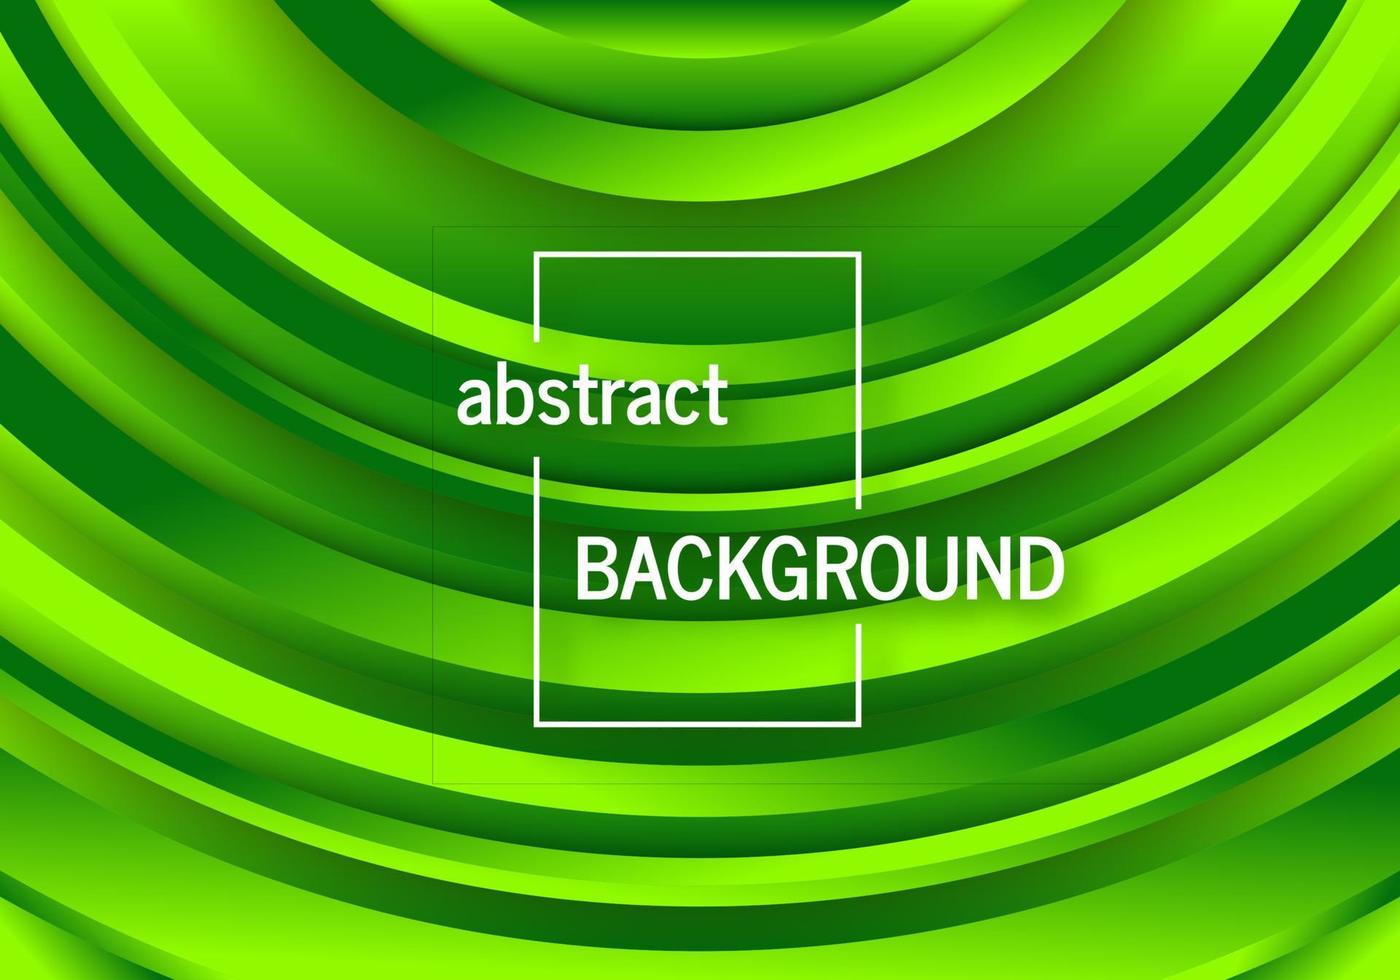 Geometric green background with abstract circles shapes vector